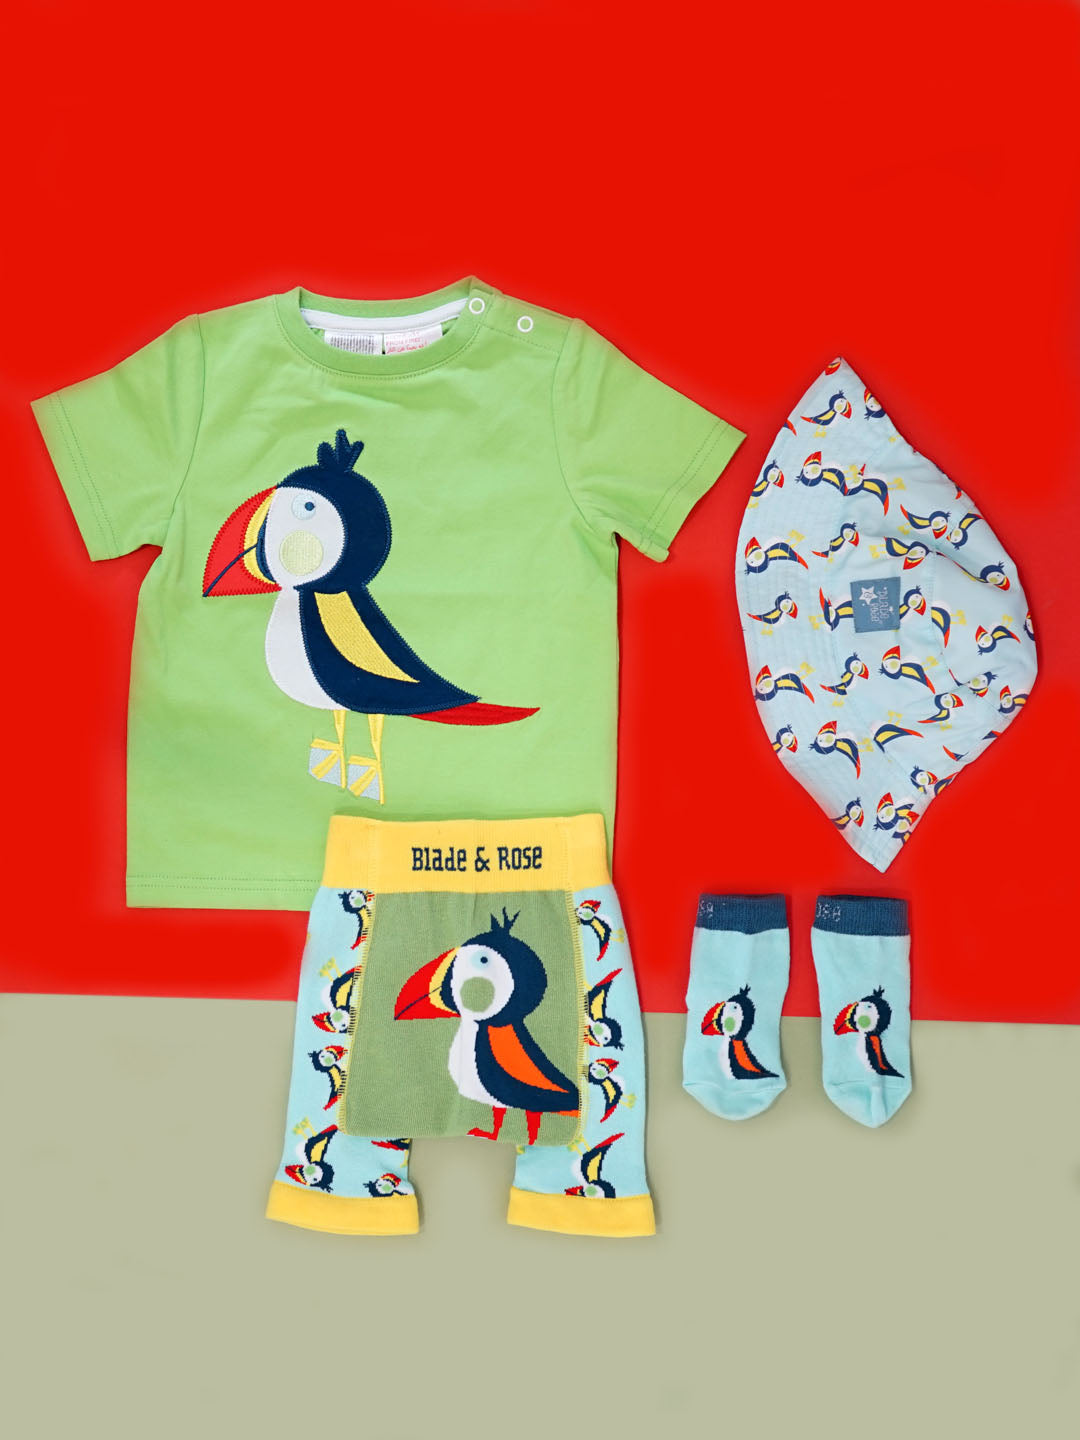 Blade & Rose - Finley the Puffin Socks